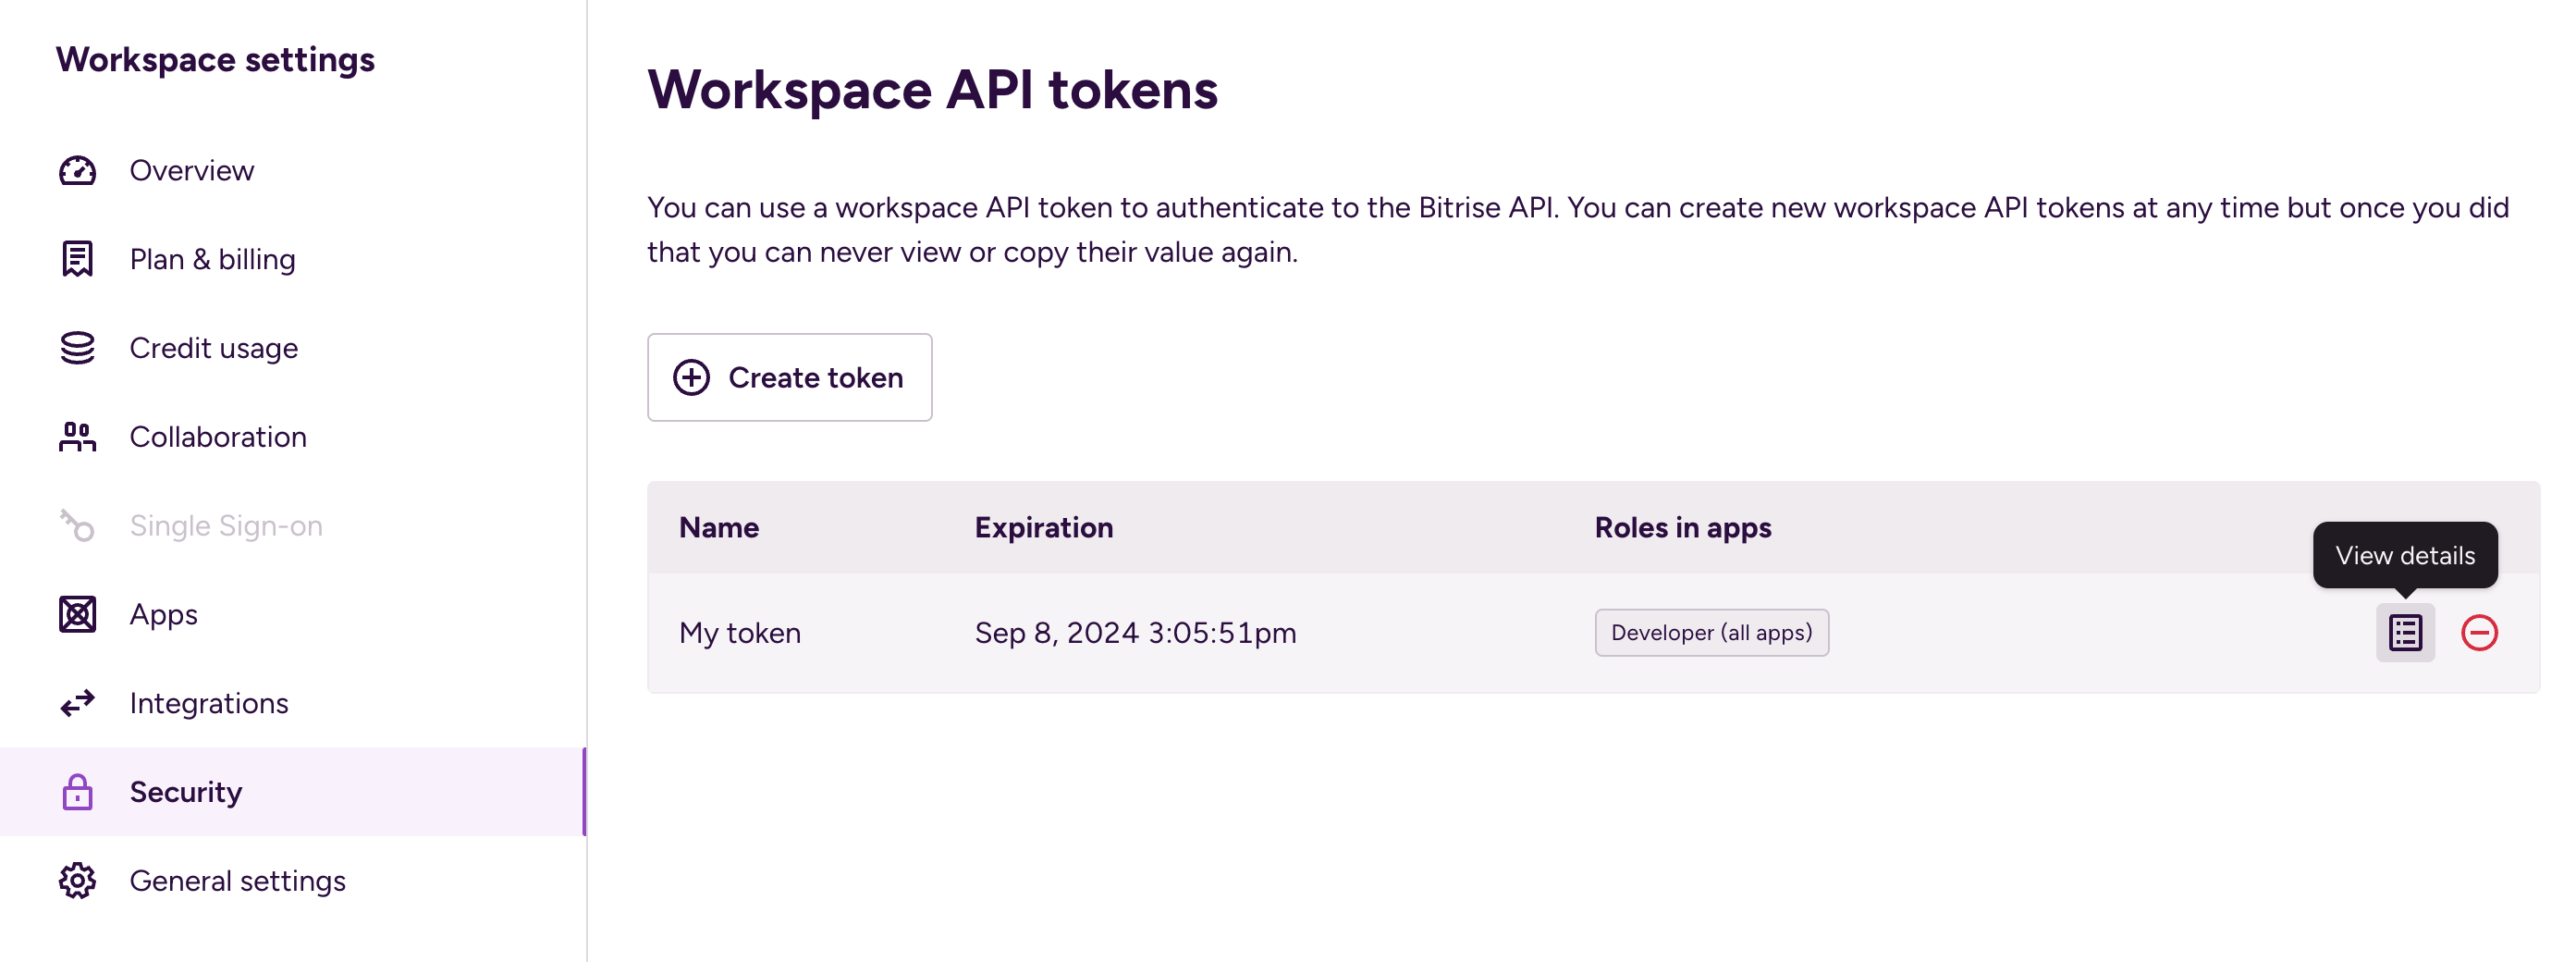 view-details-token.png